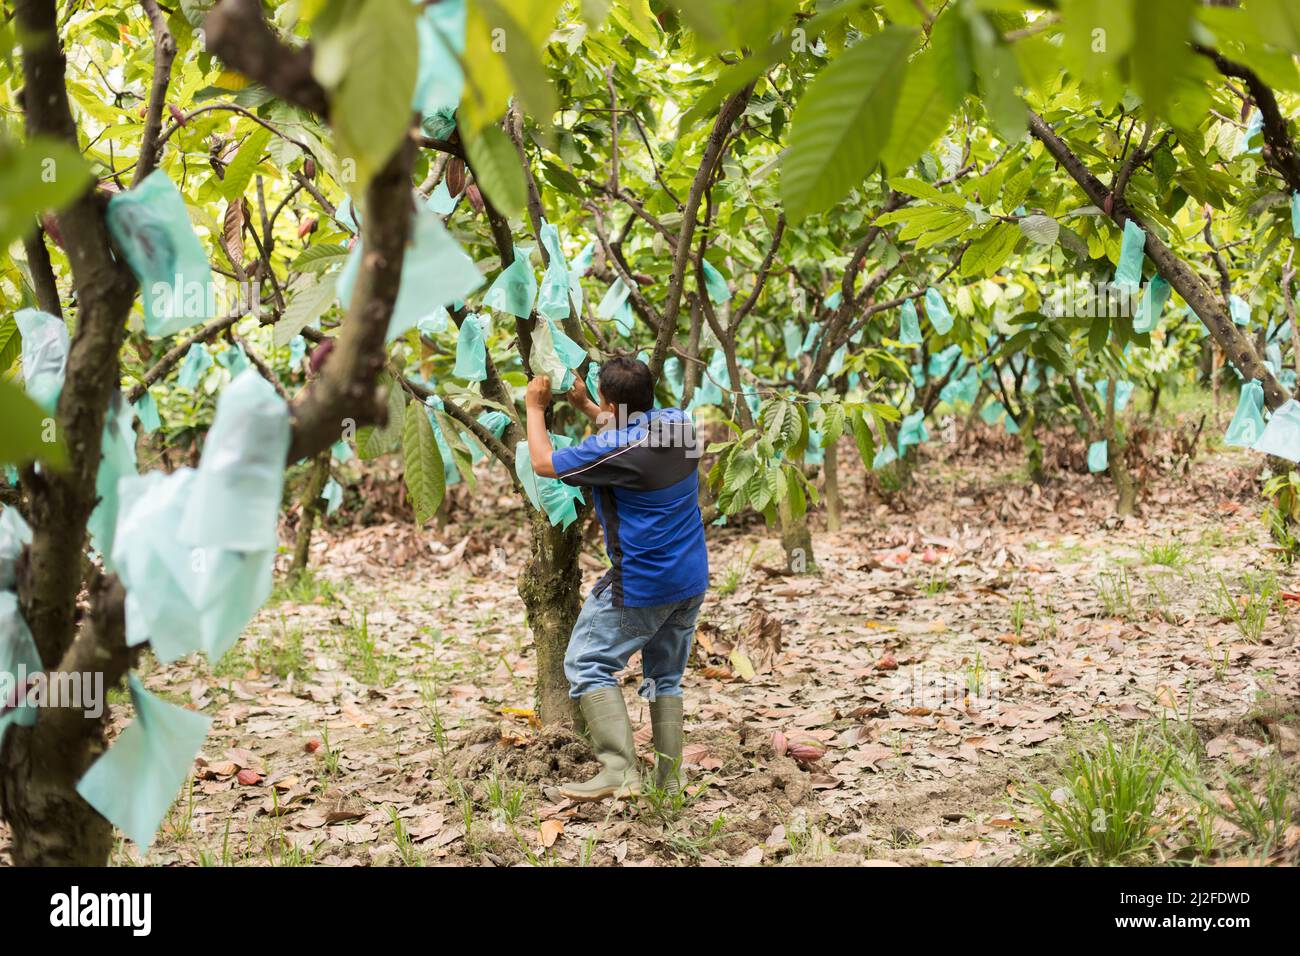 Polythene (plastic) bags cover cocoa pods growing on trees to protect them from disease on a cocoa farm in Mamuju Regency, Indonesia, Asia. Stock Photo